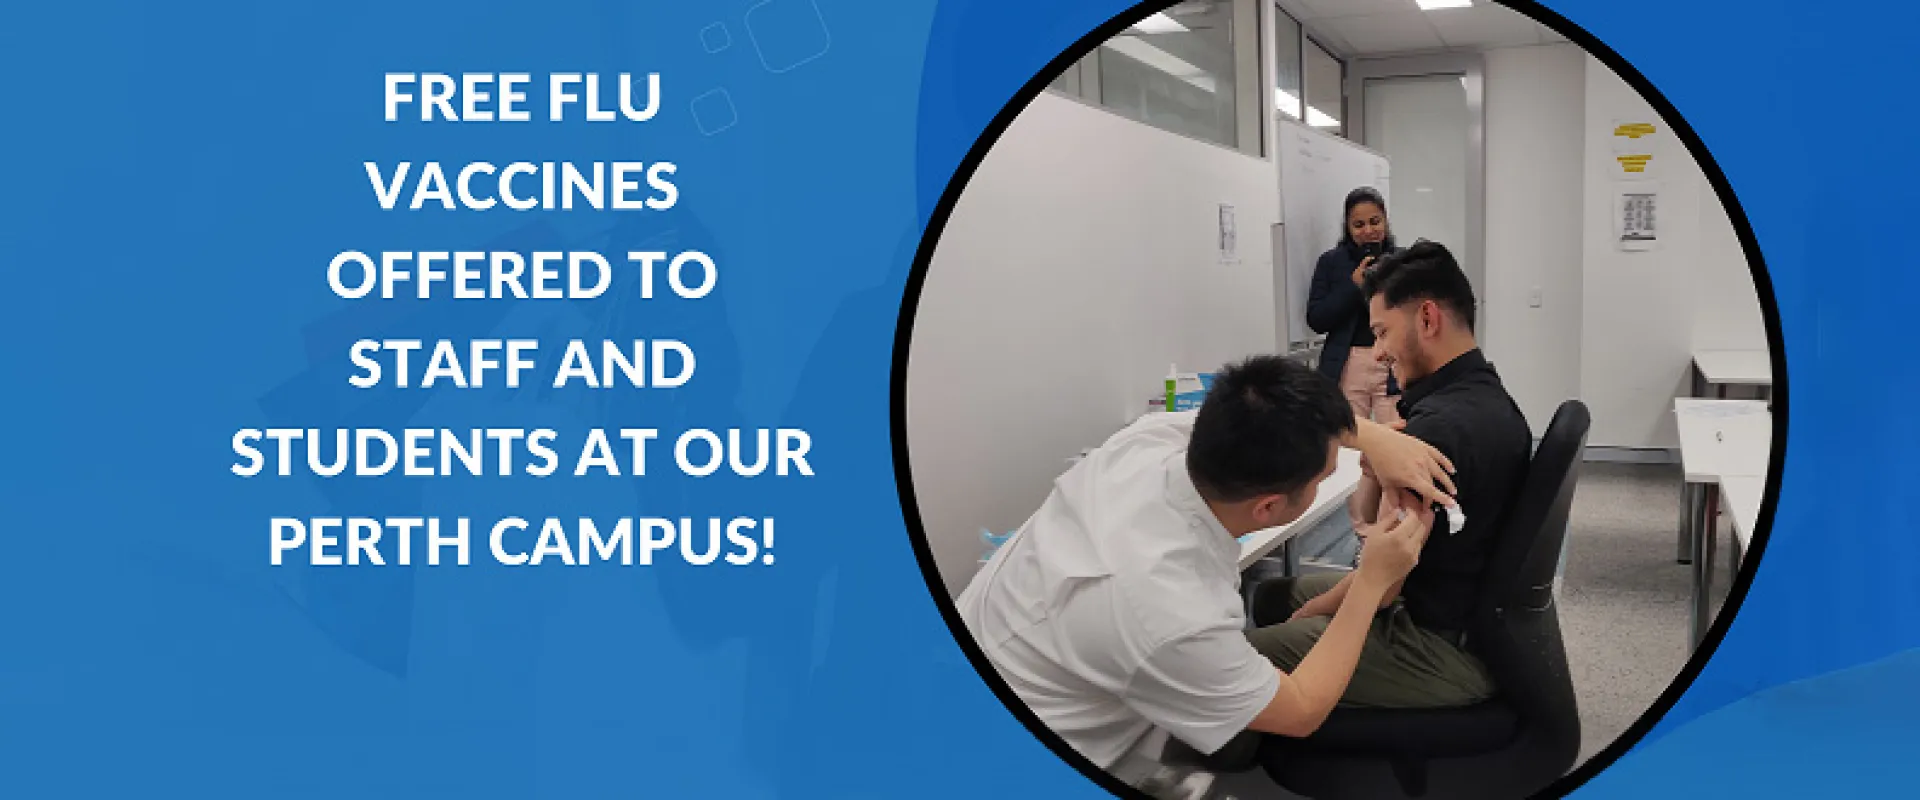 Free Flu Vaccines Offered to Staff and Students at Our Perth Campus!